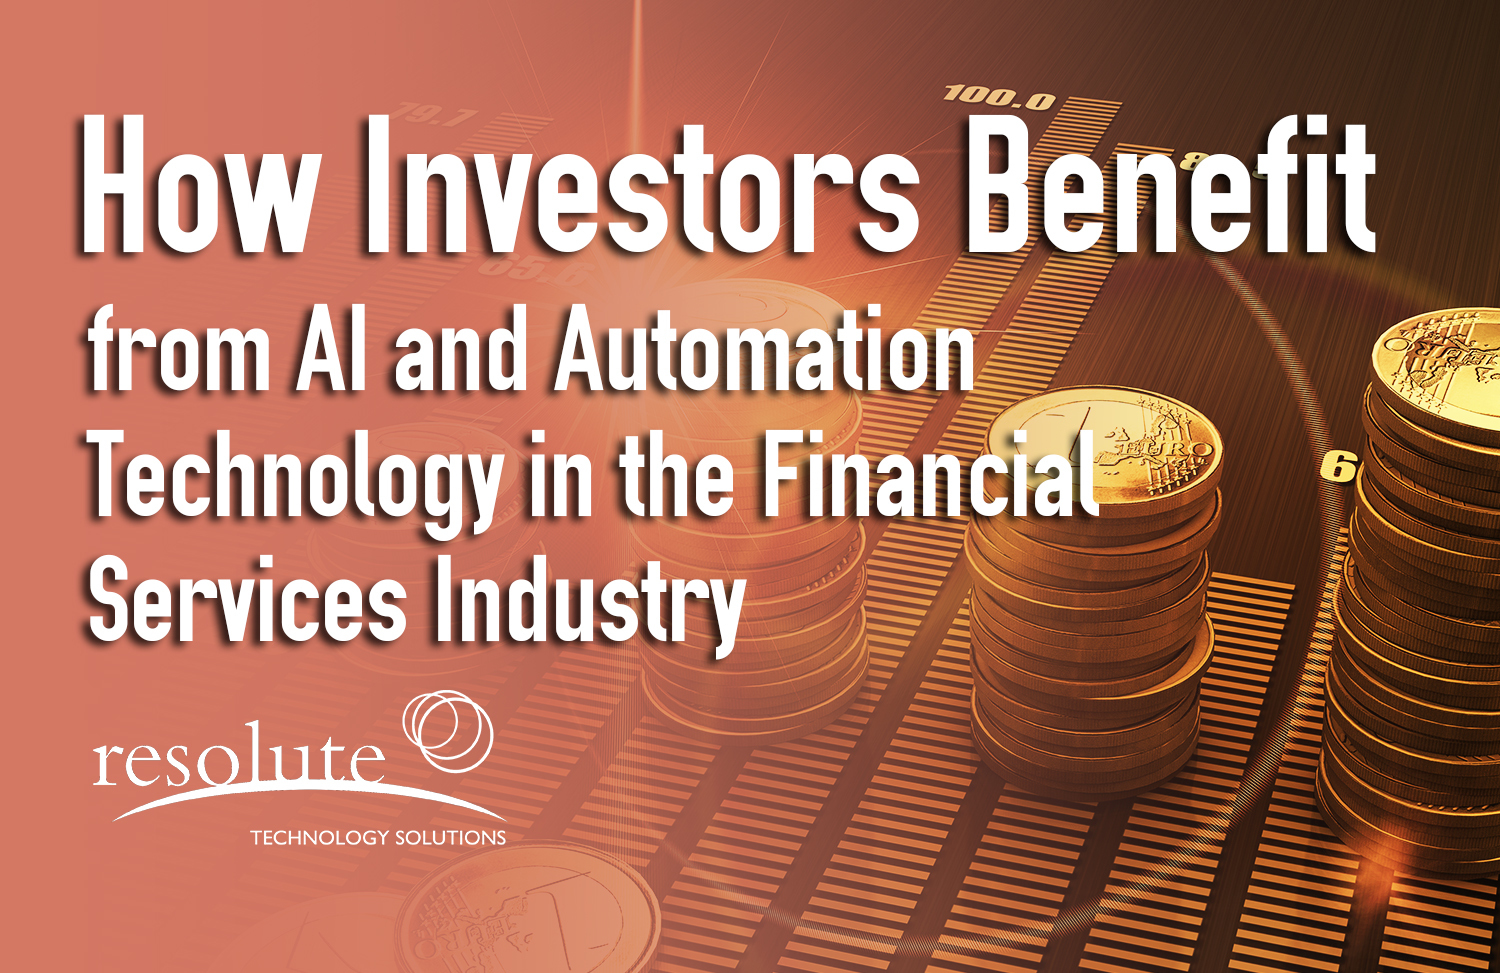 How Investors Benefit from AI and Automation Technology in the Financial Services Industry